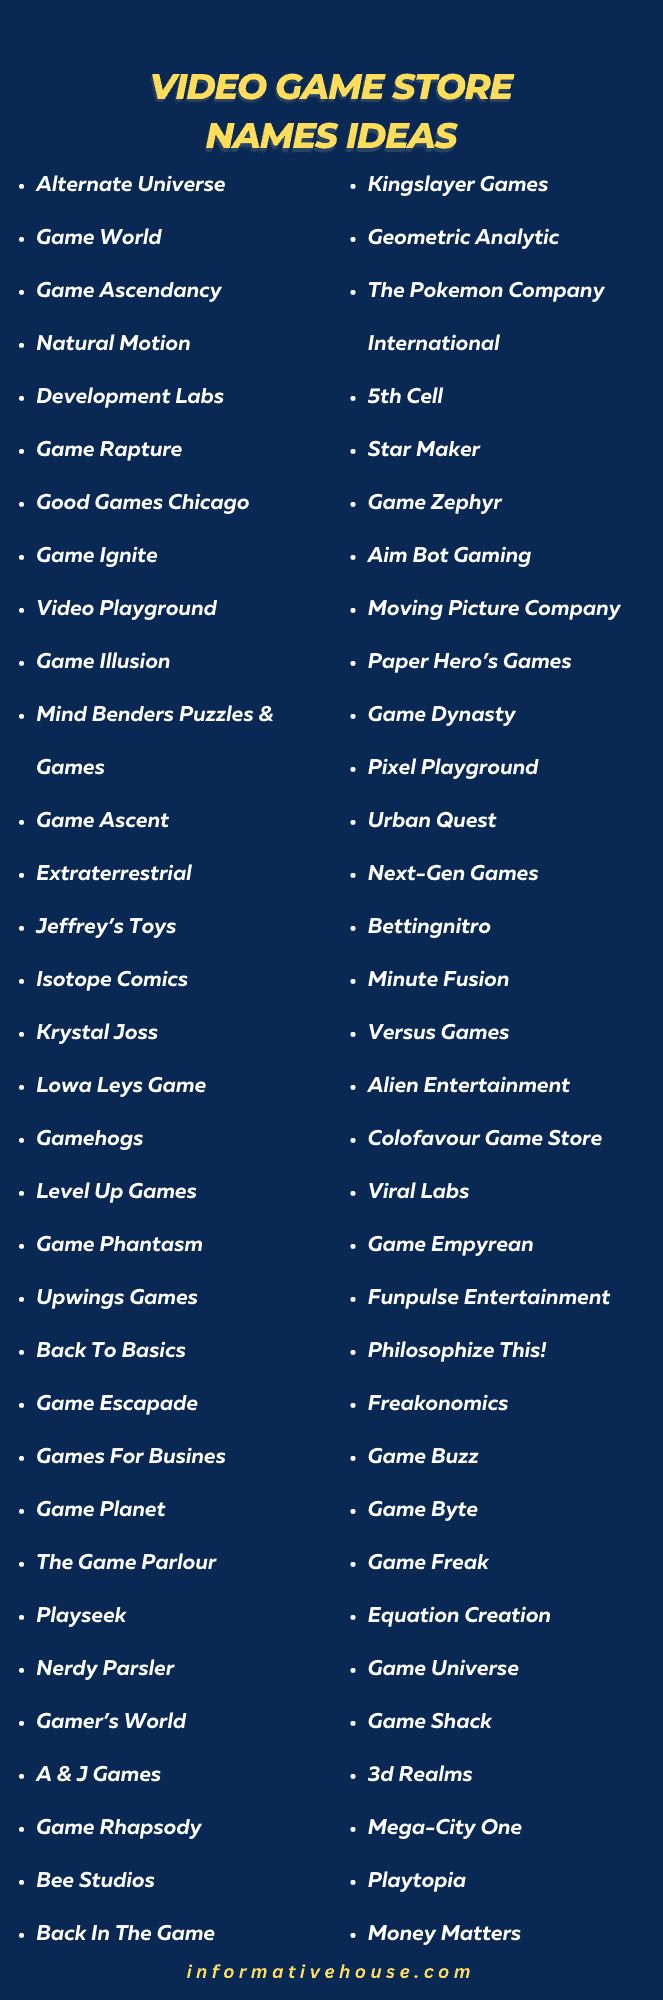 Video Game Store Names Ideas